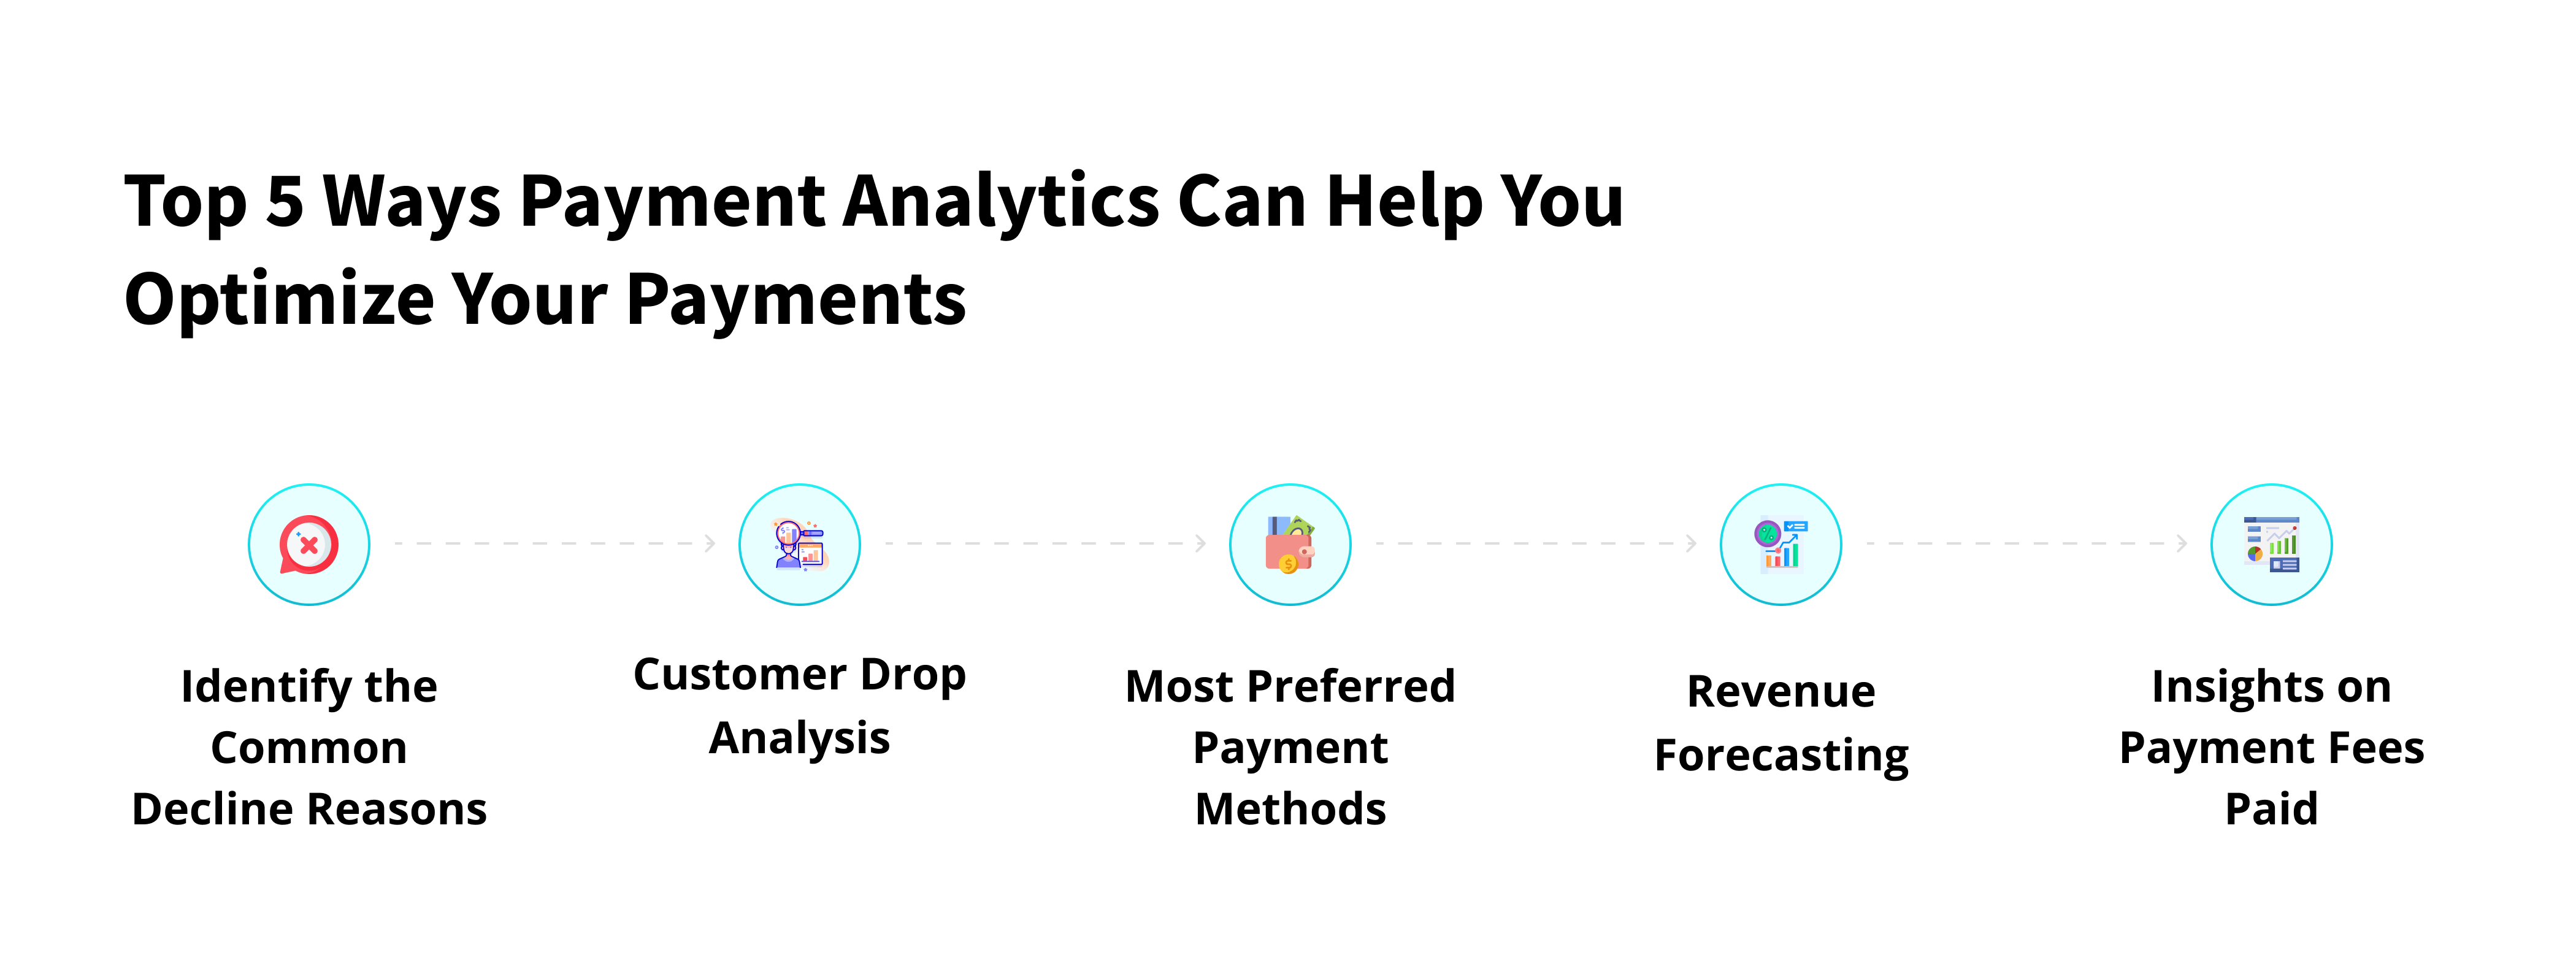 5 ways payment analytics can help you grow your business